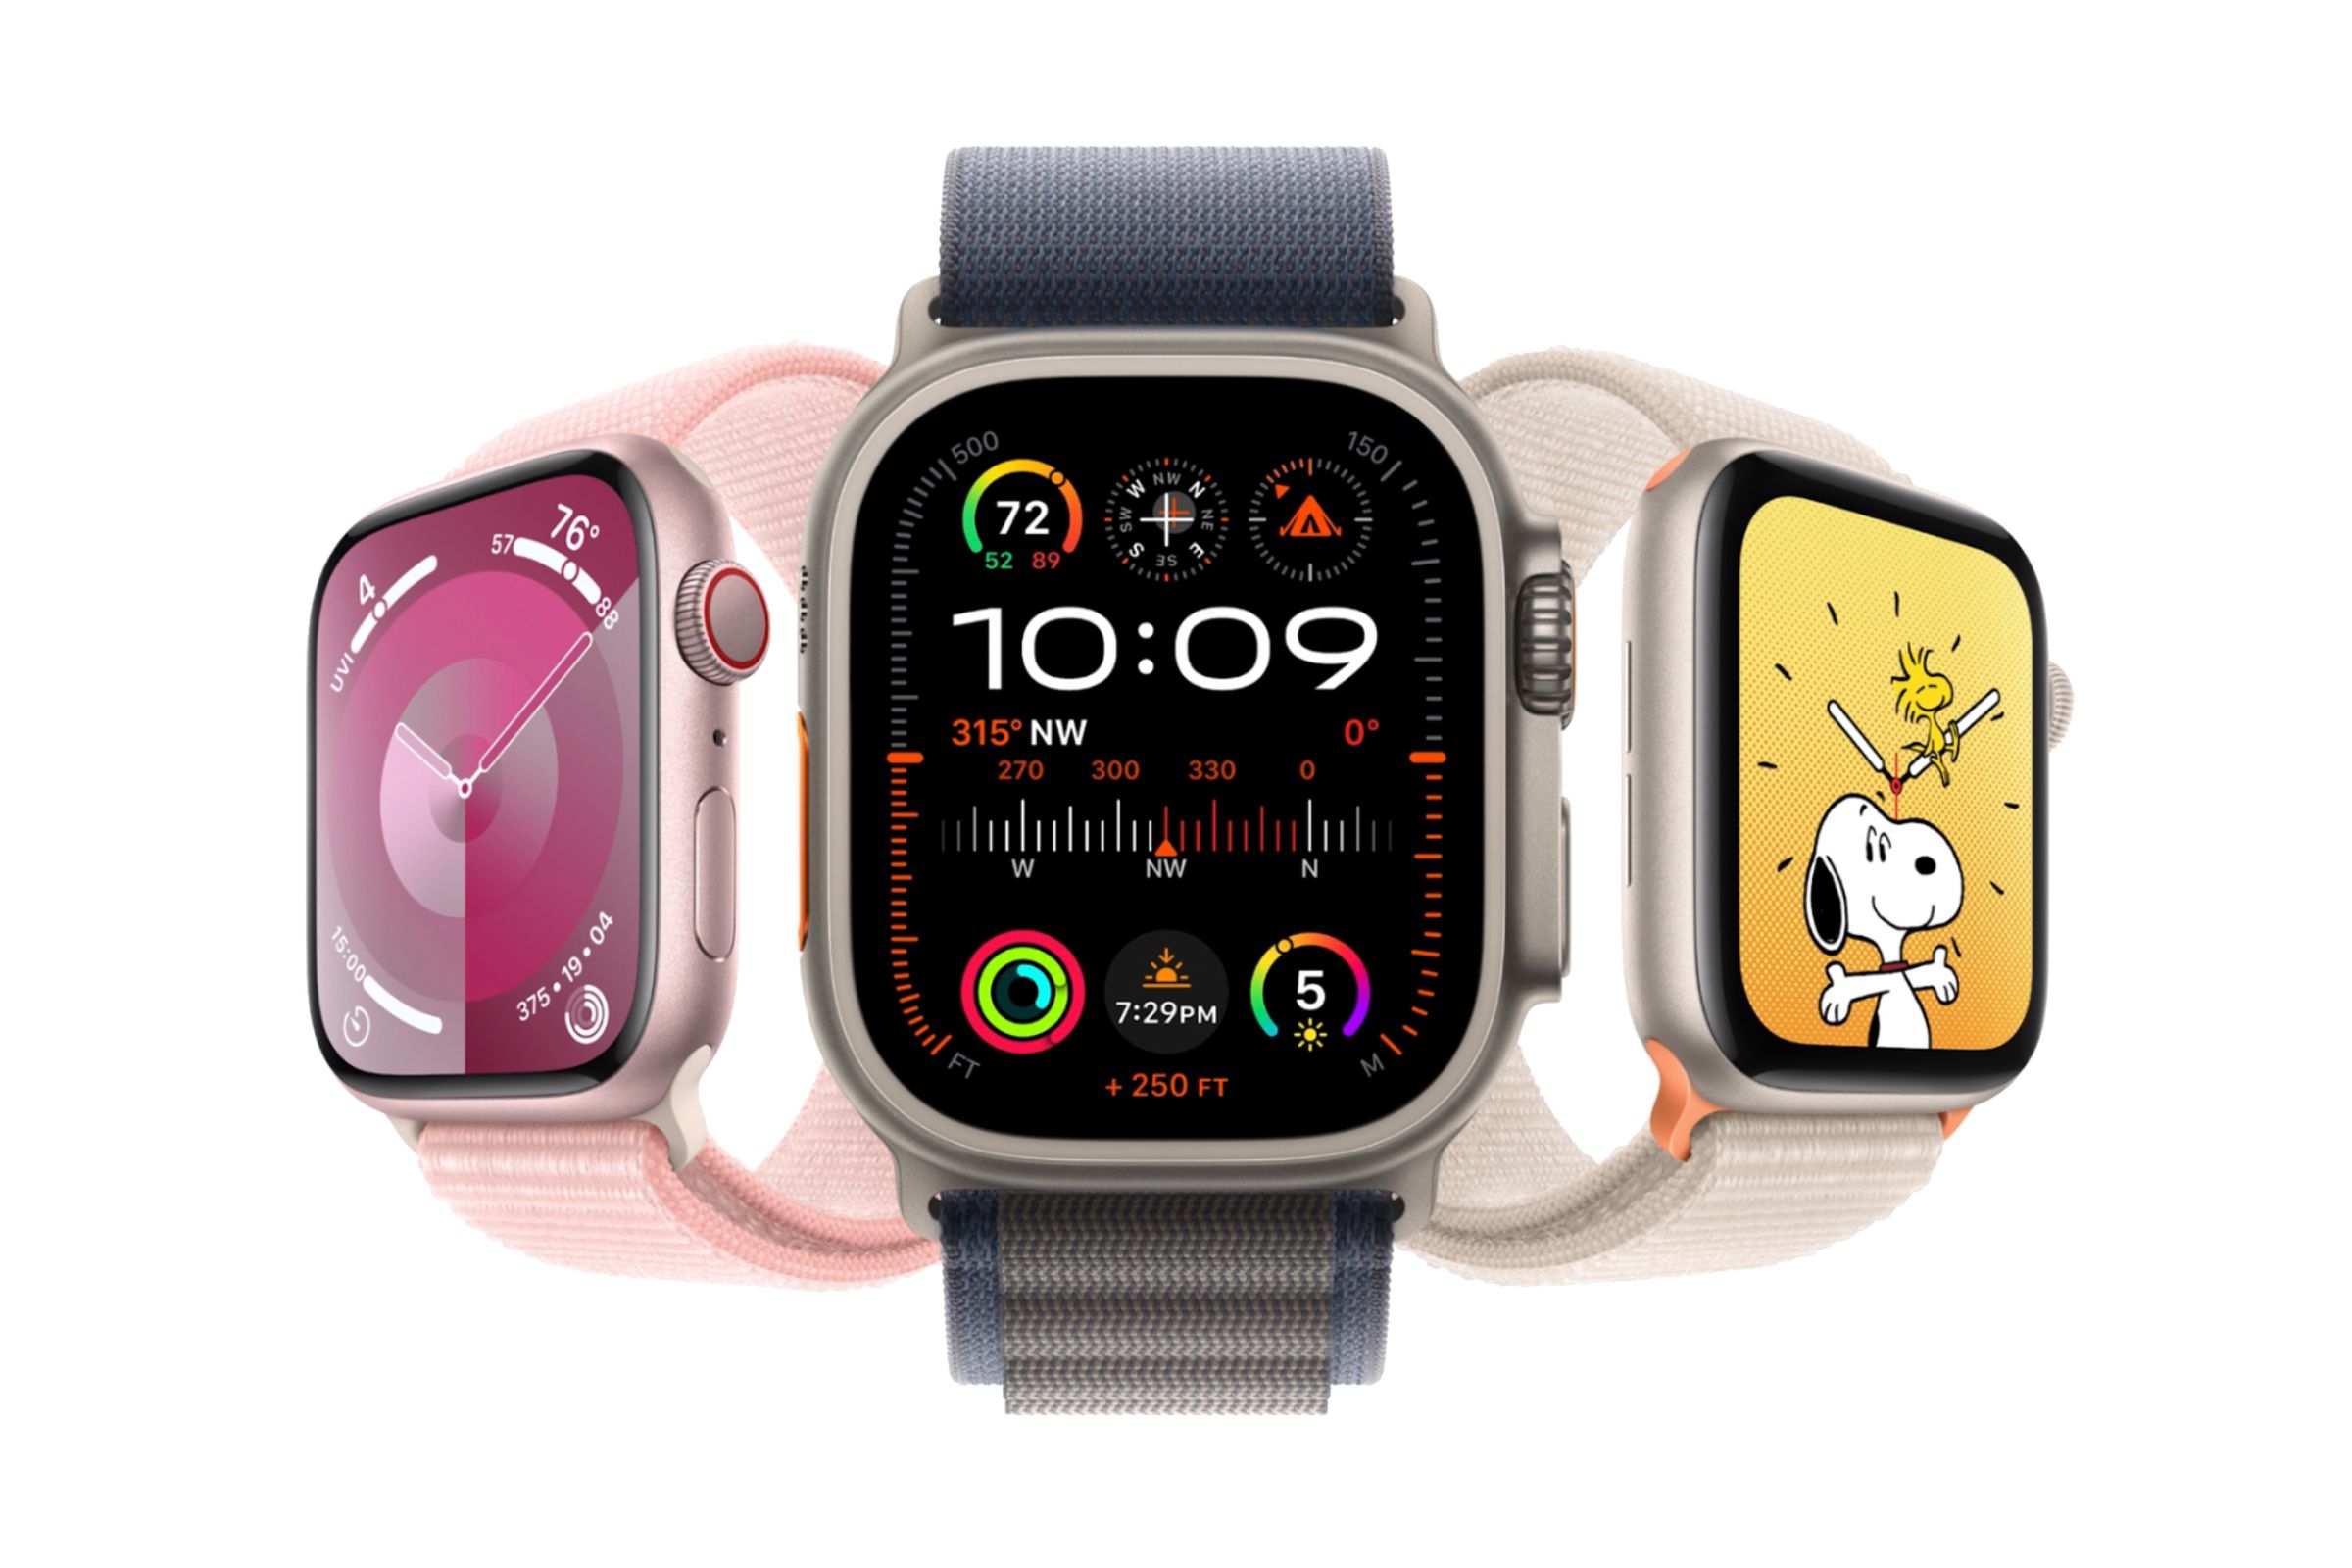 Apple’s forthcoming watches boast better performance, a new ultra wideband chip, and other minor improvements.